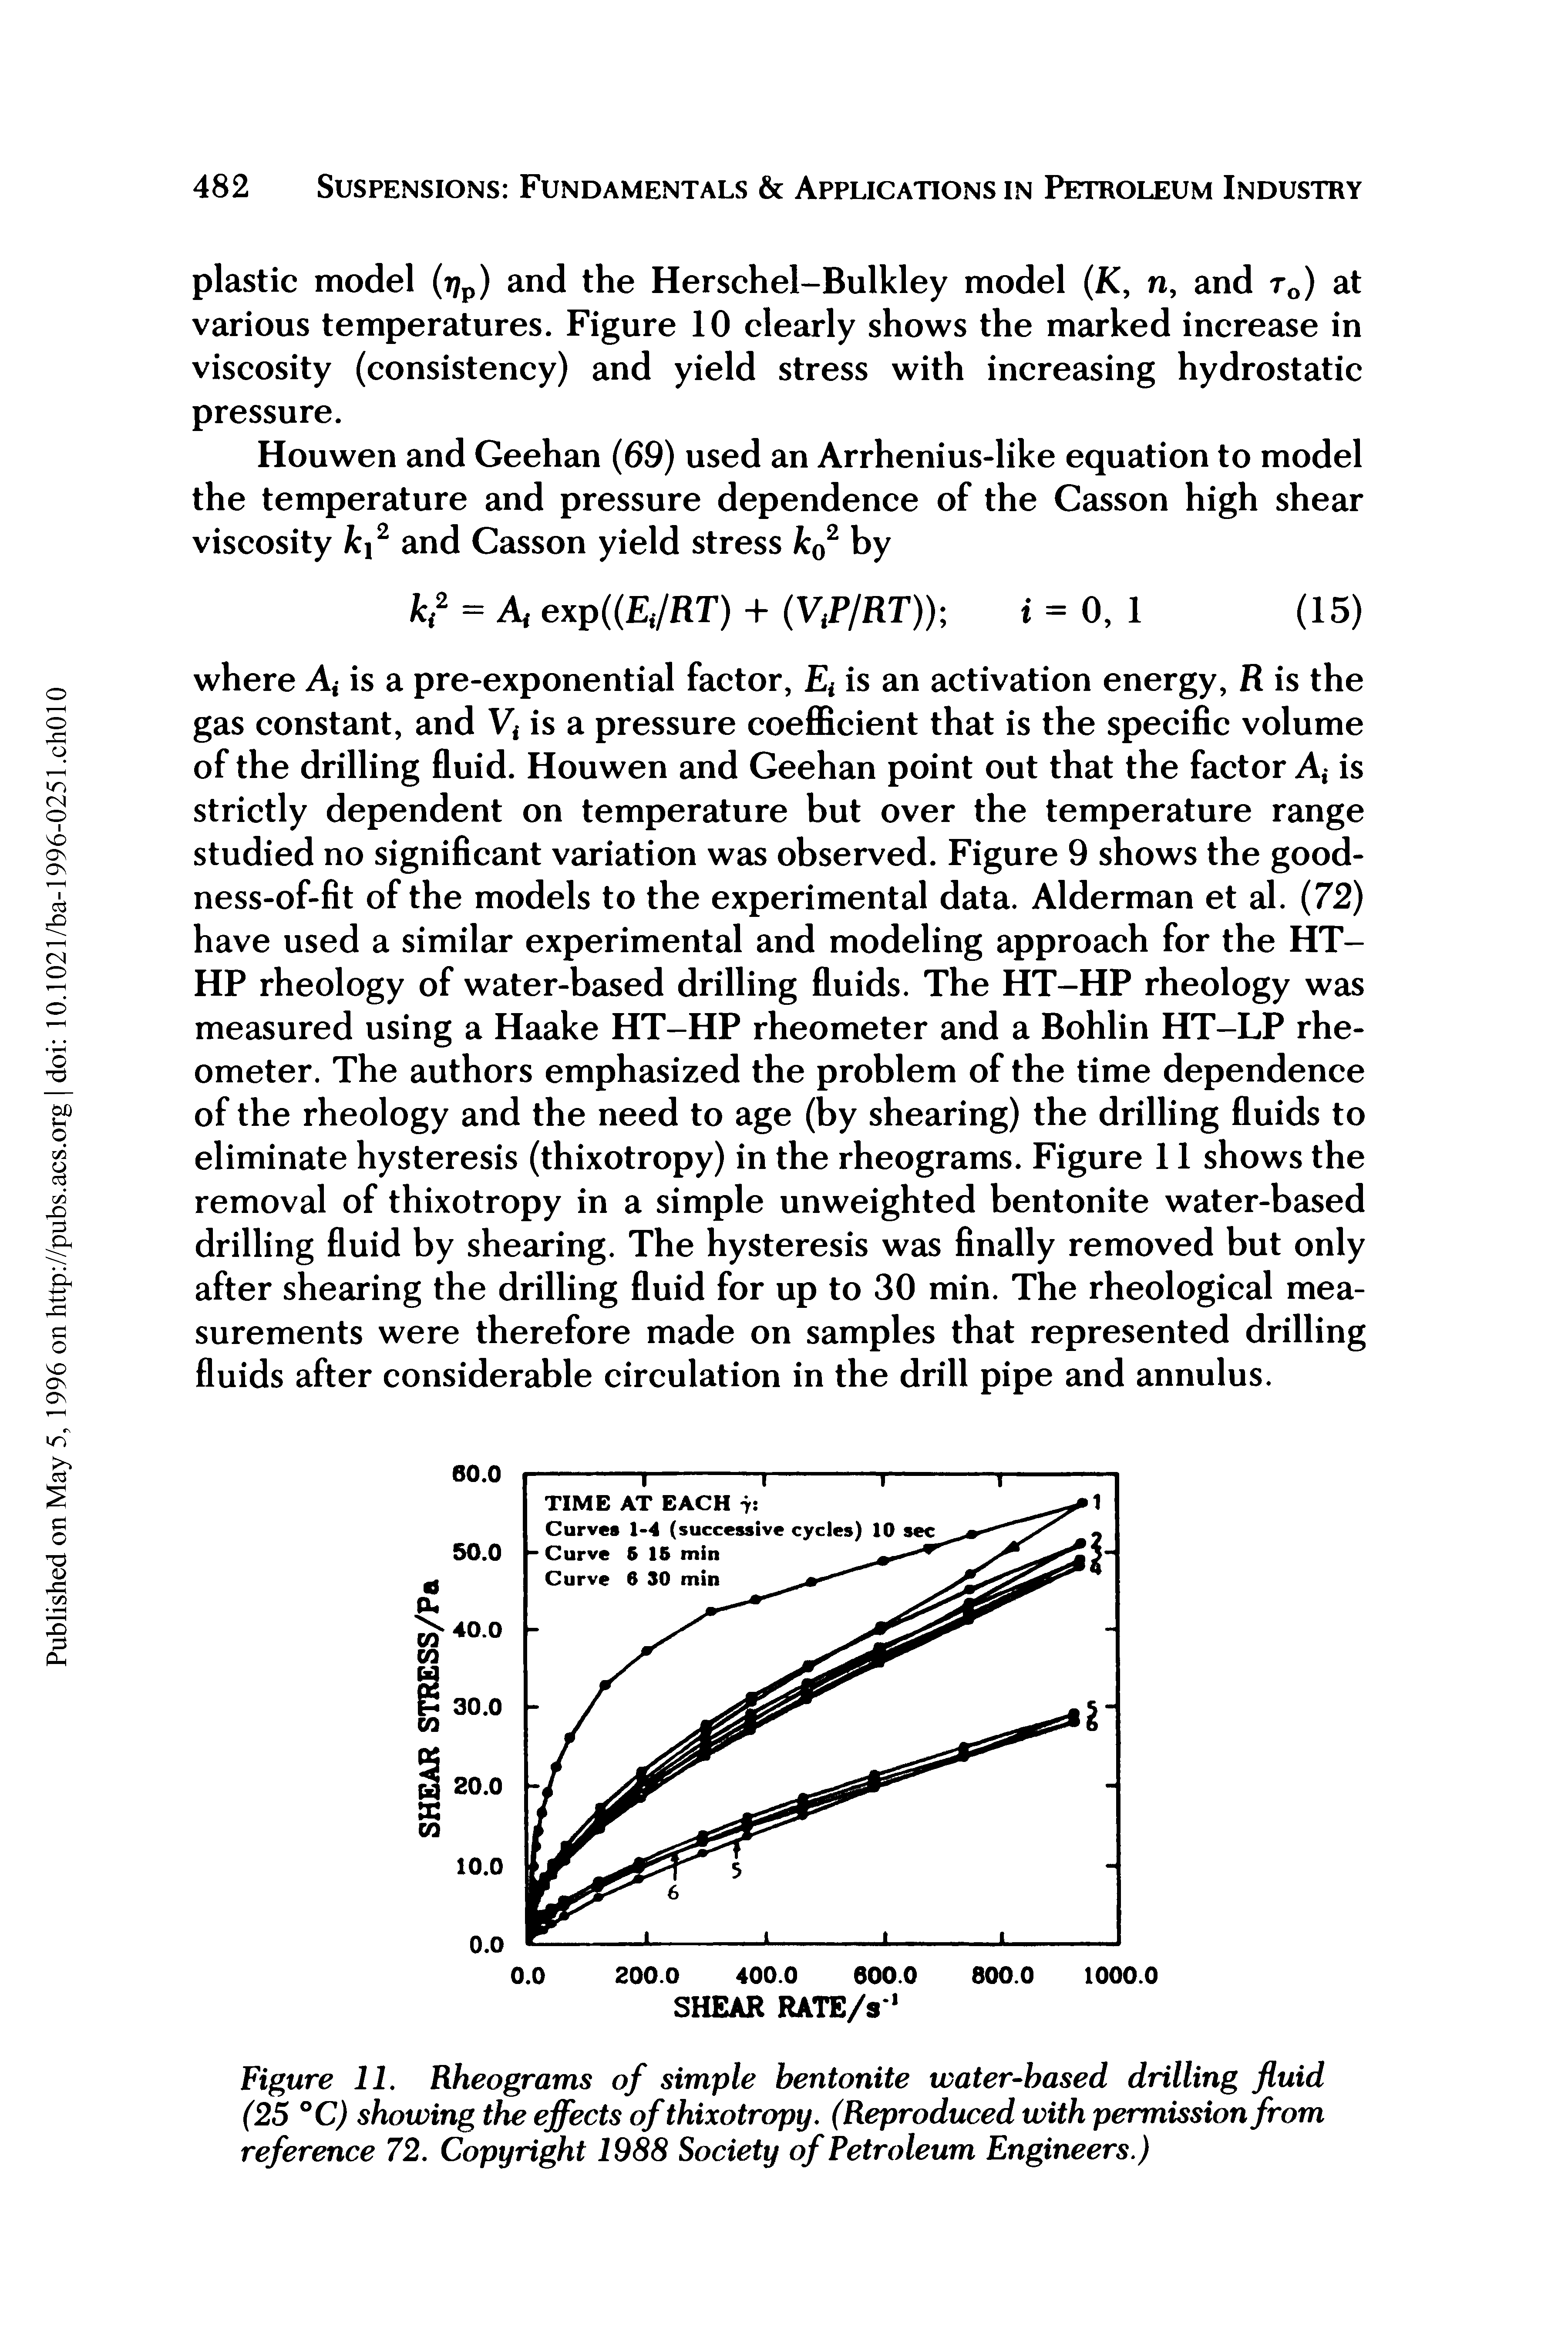 Figure 11. Rheograms of simple bentonite water-based drilling fluid (25 °C) showing the effects of thixotropy. (Reproduced with permission from reference 72. Copyright 1988 Society of Petroleum Engineers.)...